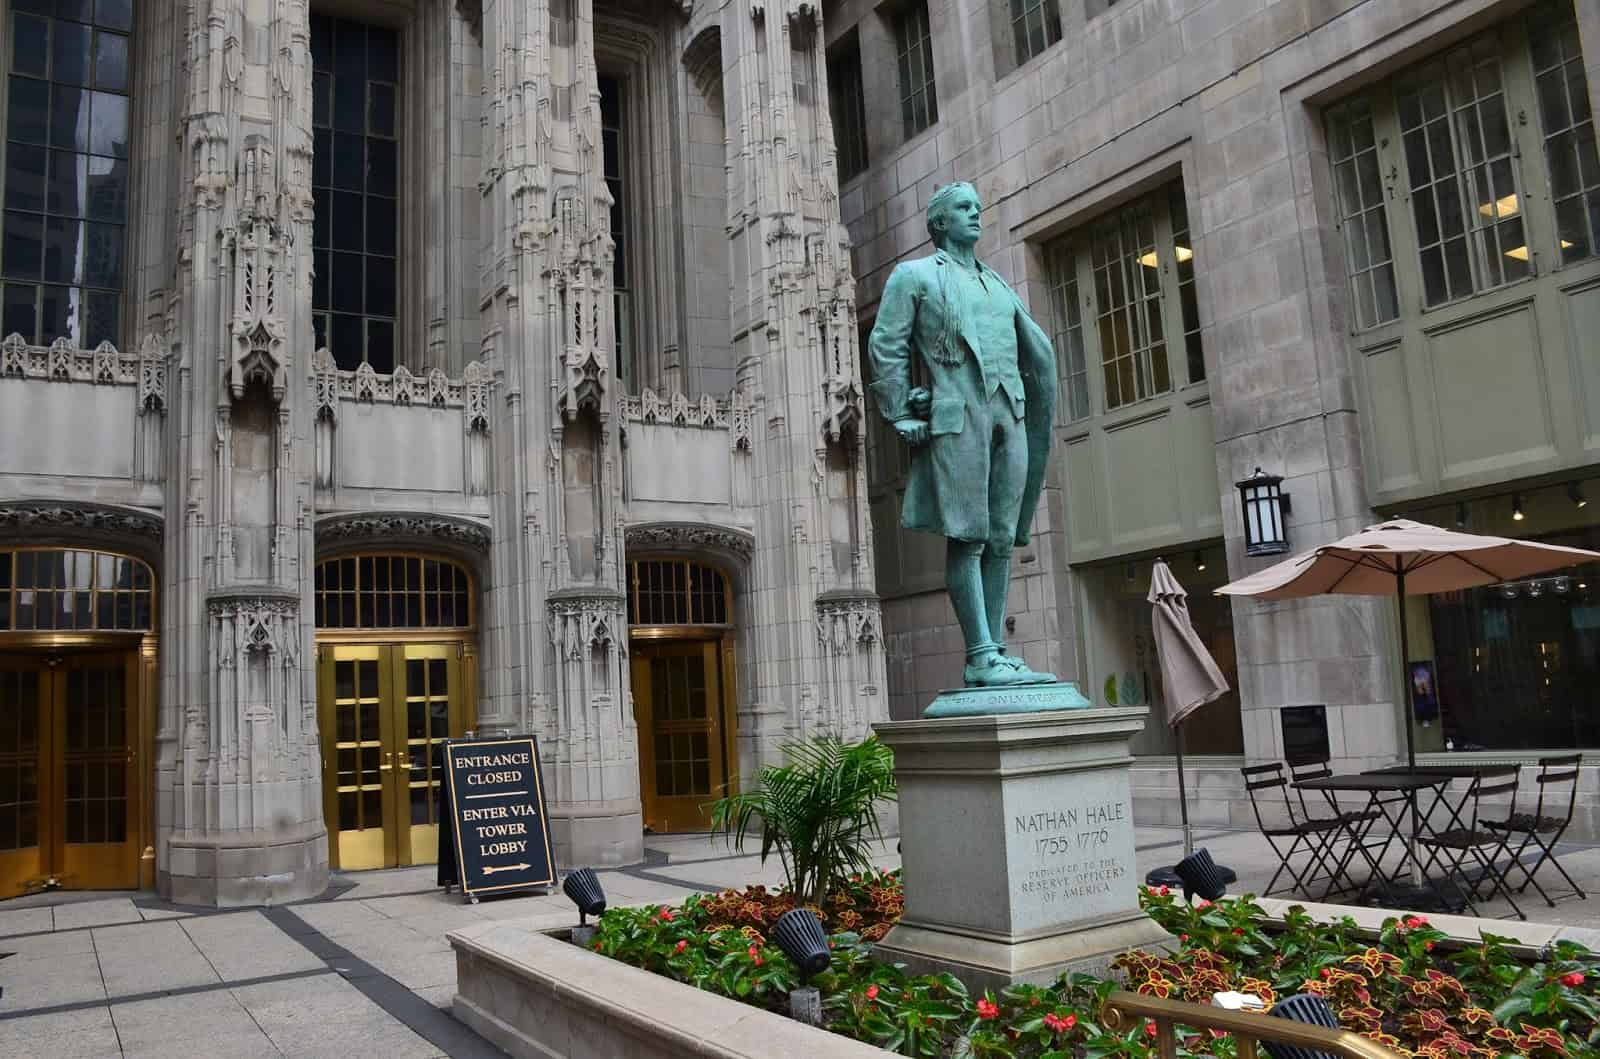 Entrance and statue of Nathan Hale at the Tribune Tower on the Magnificent Mile in Chicago